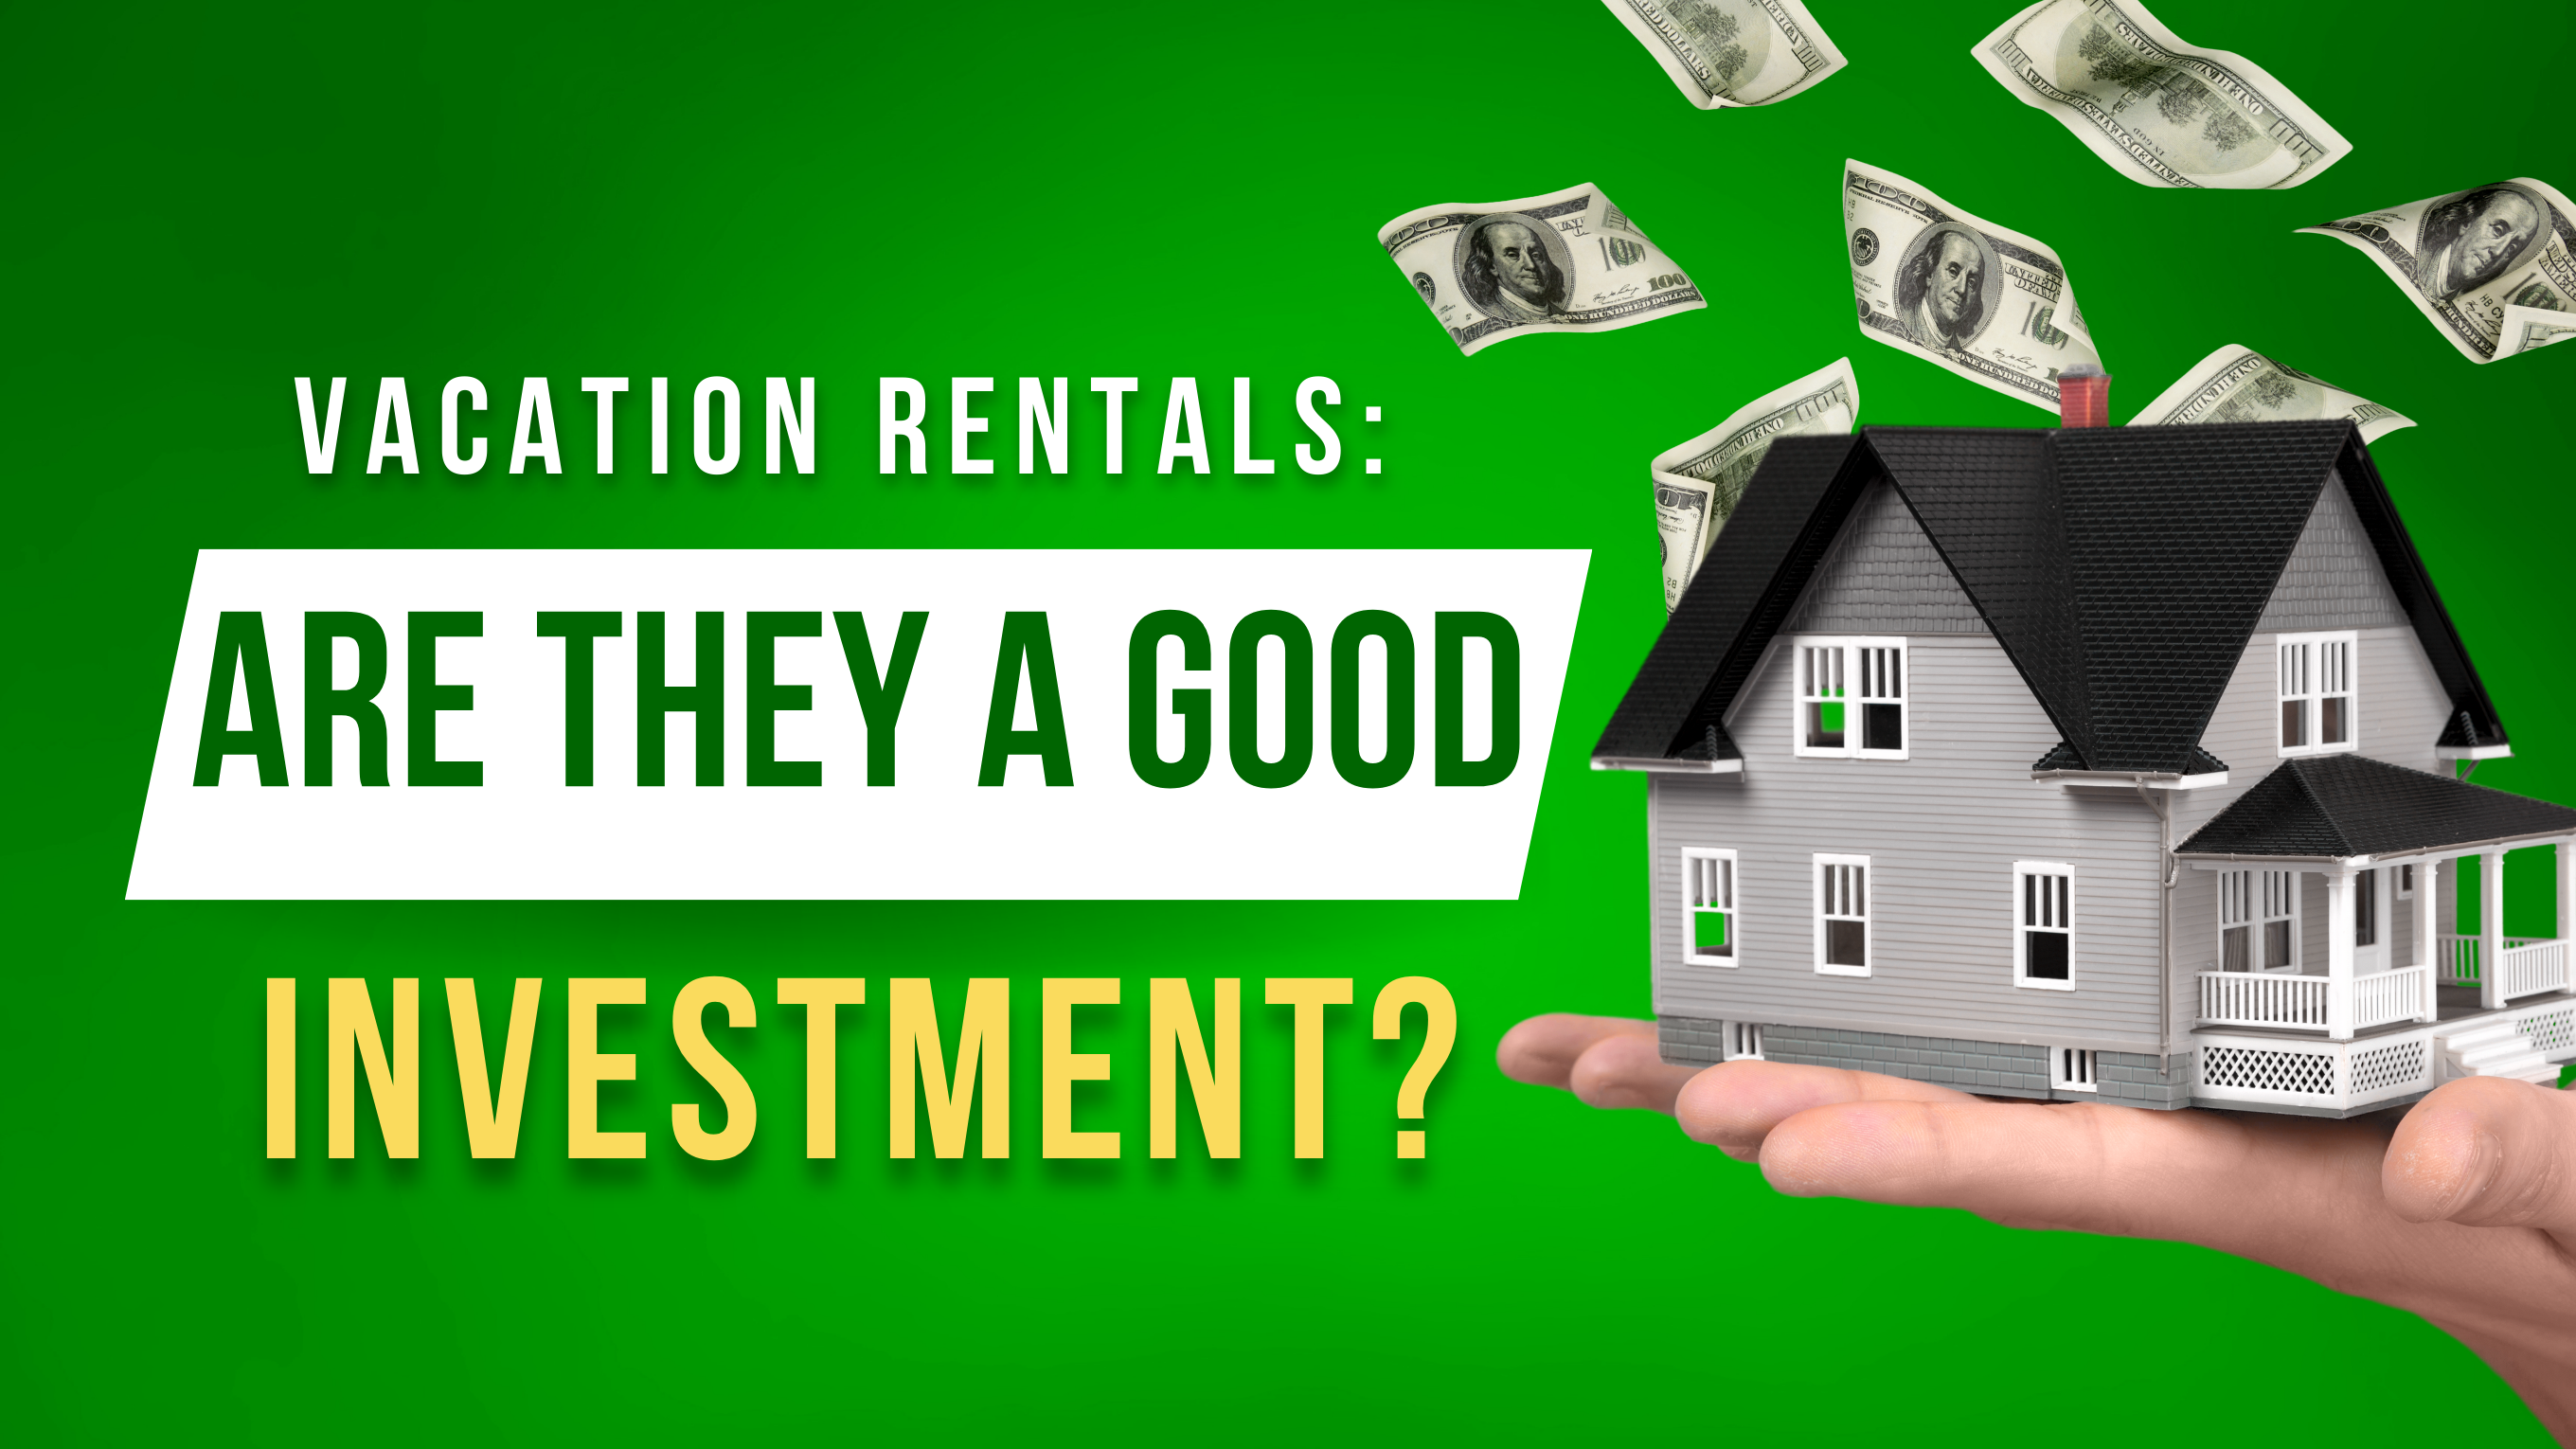 Are Vacation Rentals a Good Investment? Exploring the Pros and Cons